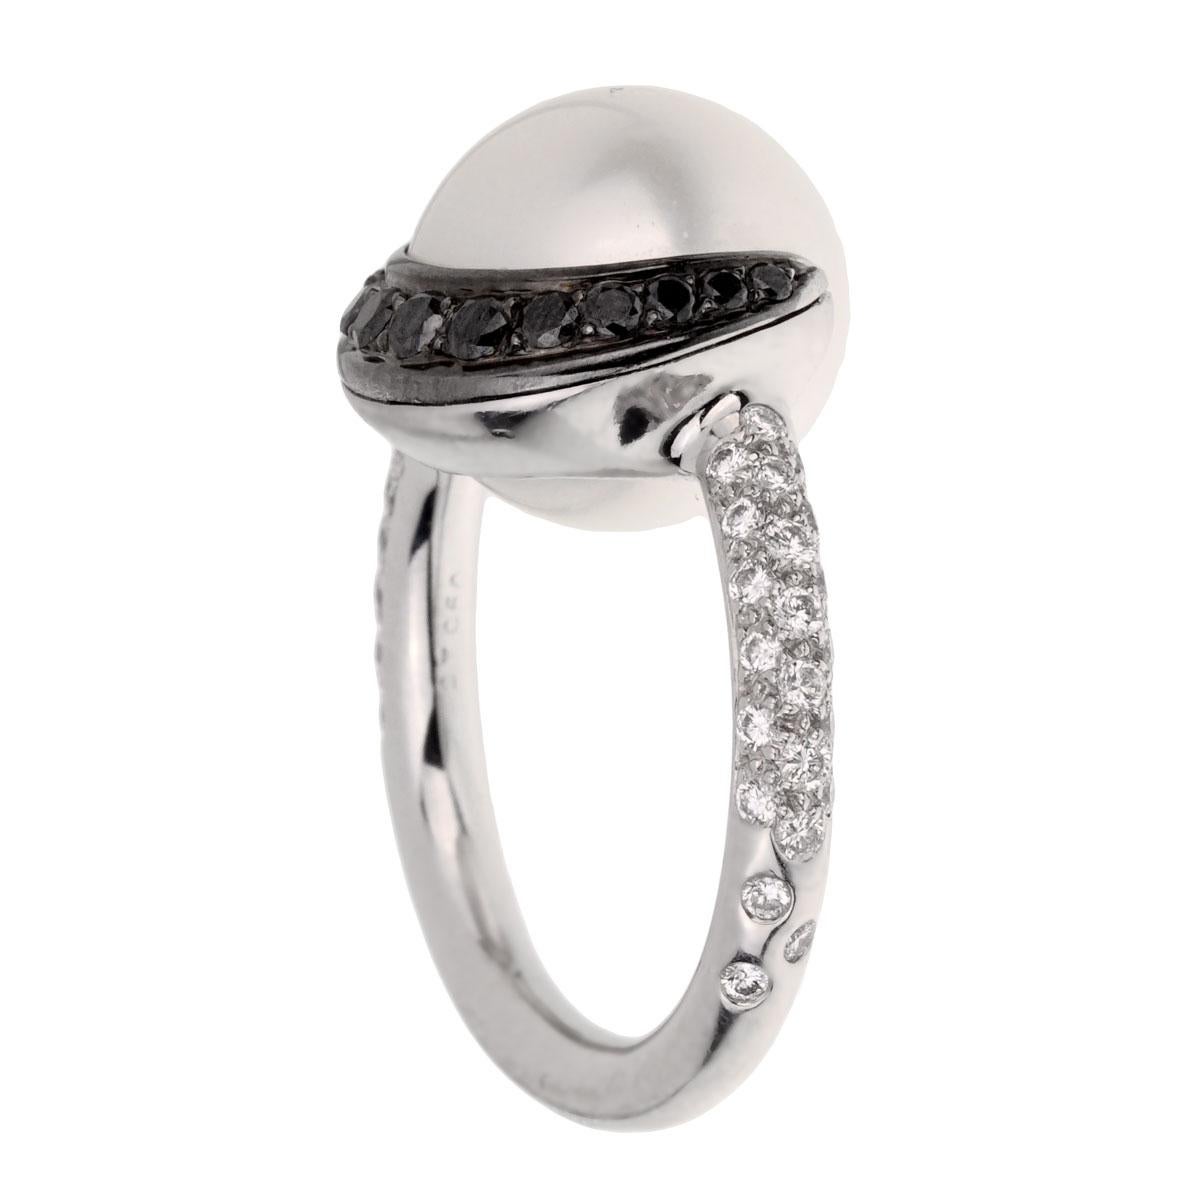 A fabulous Chanel diamond ring circa 2000s adorned with round brilliant cut diamonds, and round brilliant cut diamonds encasing the pearl set in platinum.

Resizeable